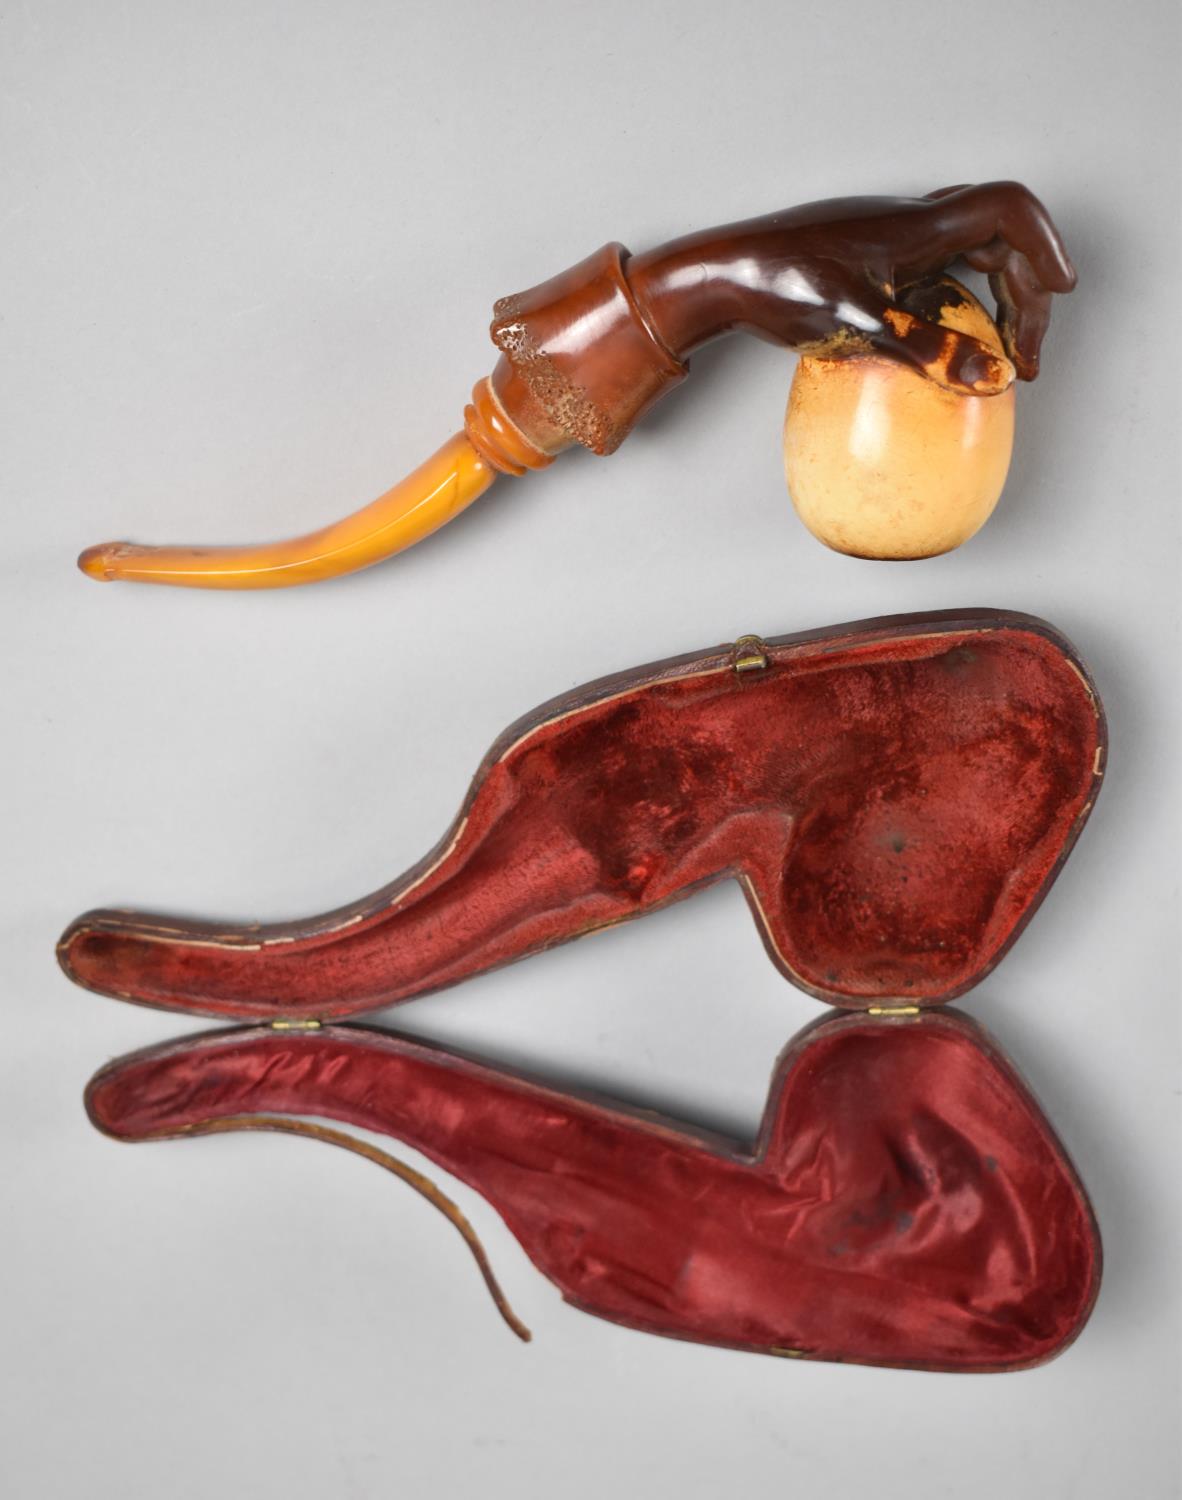 A 19th Century Cased Amber and Meerschaum Pipe Modelled as a Hand Holding an Egg, 21cms Long